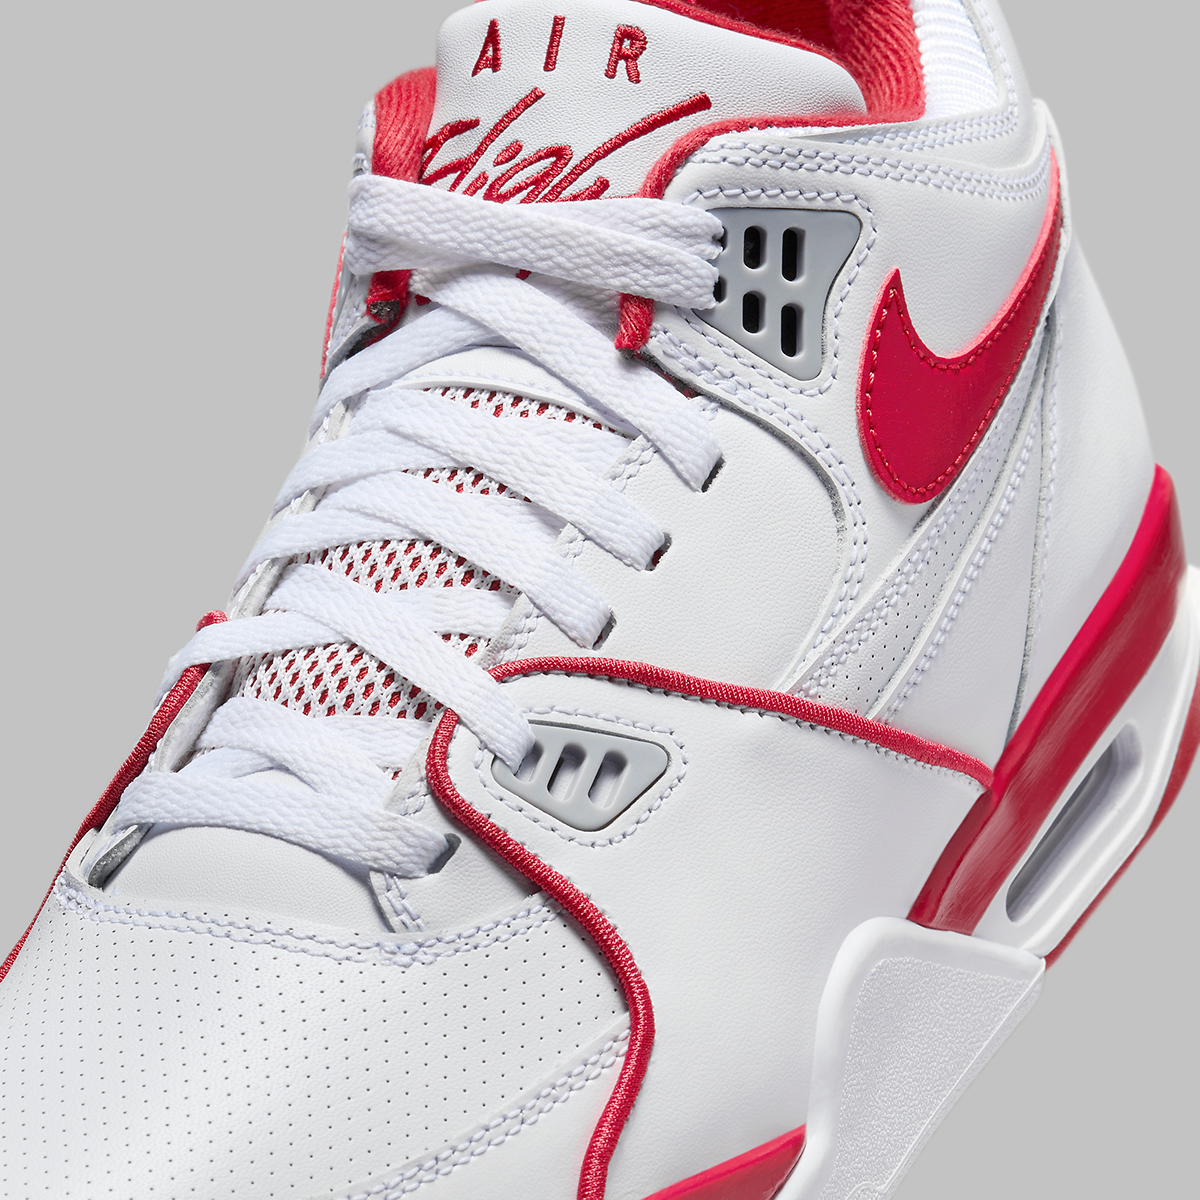 nike shoe outlet for kids White Red Grey Hm3467 100 6